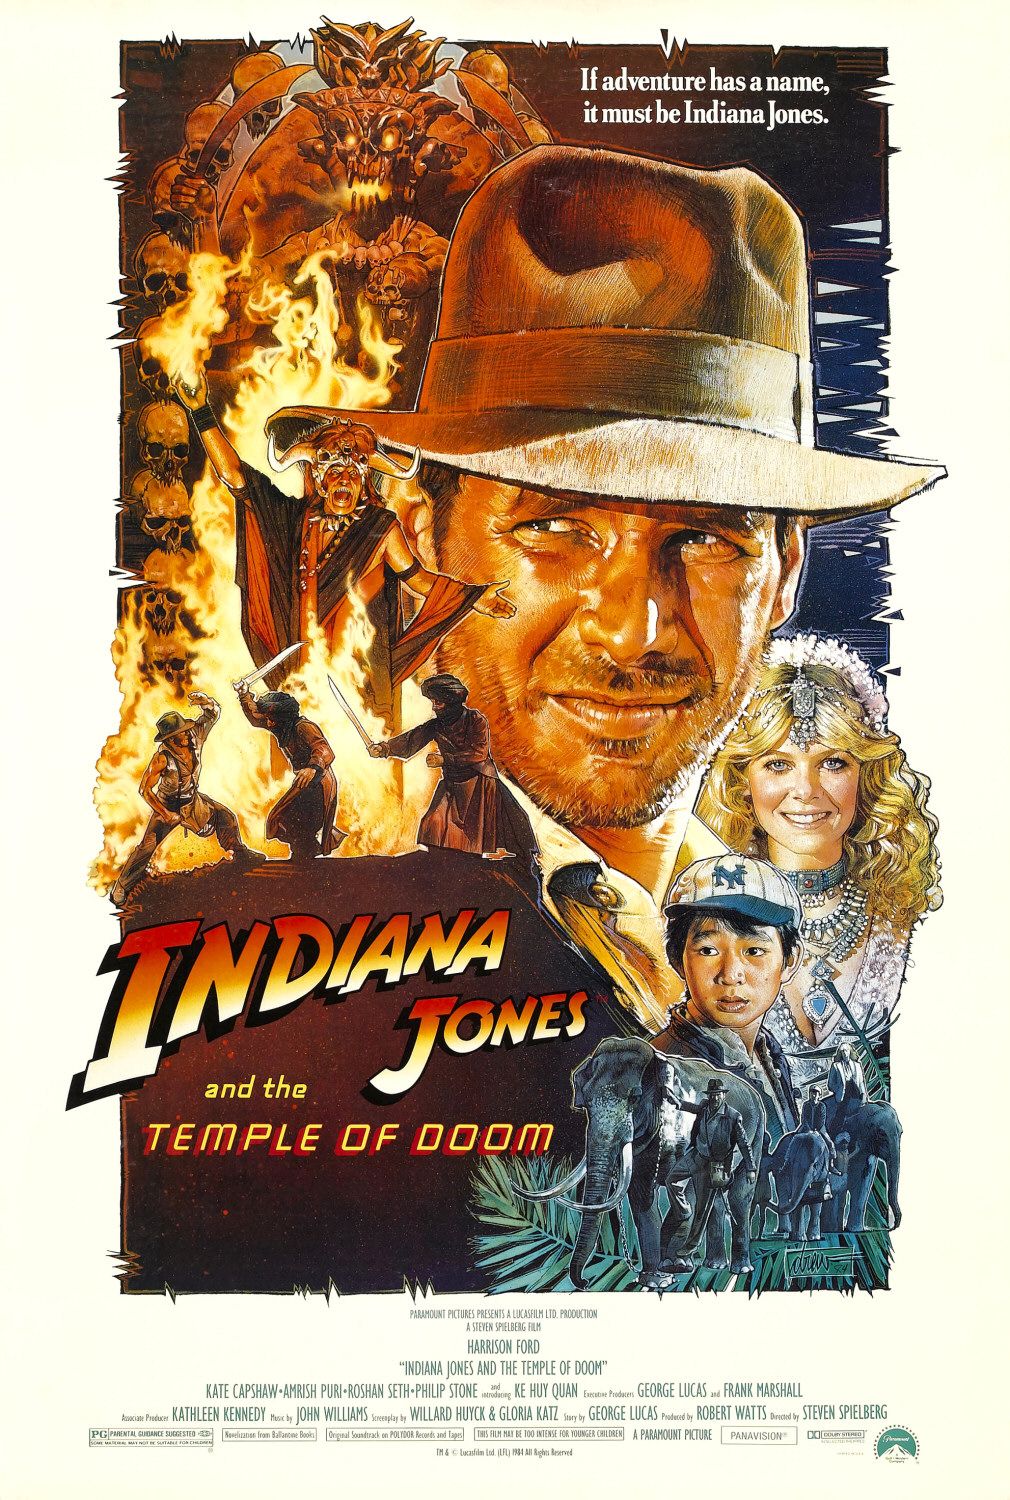 80s movie poster - If adventure has a name, it must be Indiana Jones. Widiana Vones and the Temple Of Doom Dolu Undu. L Evle